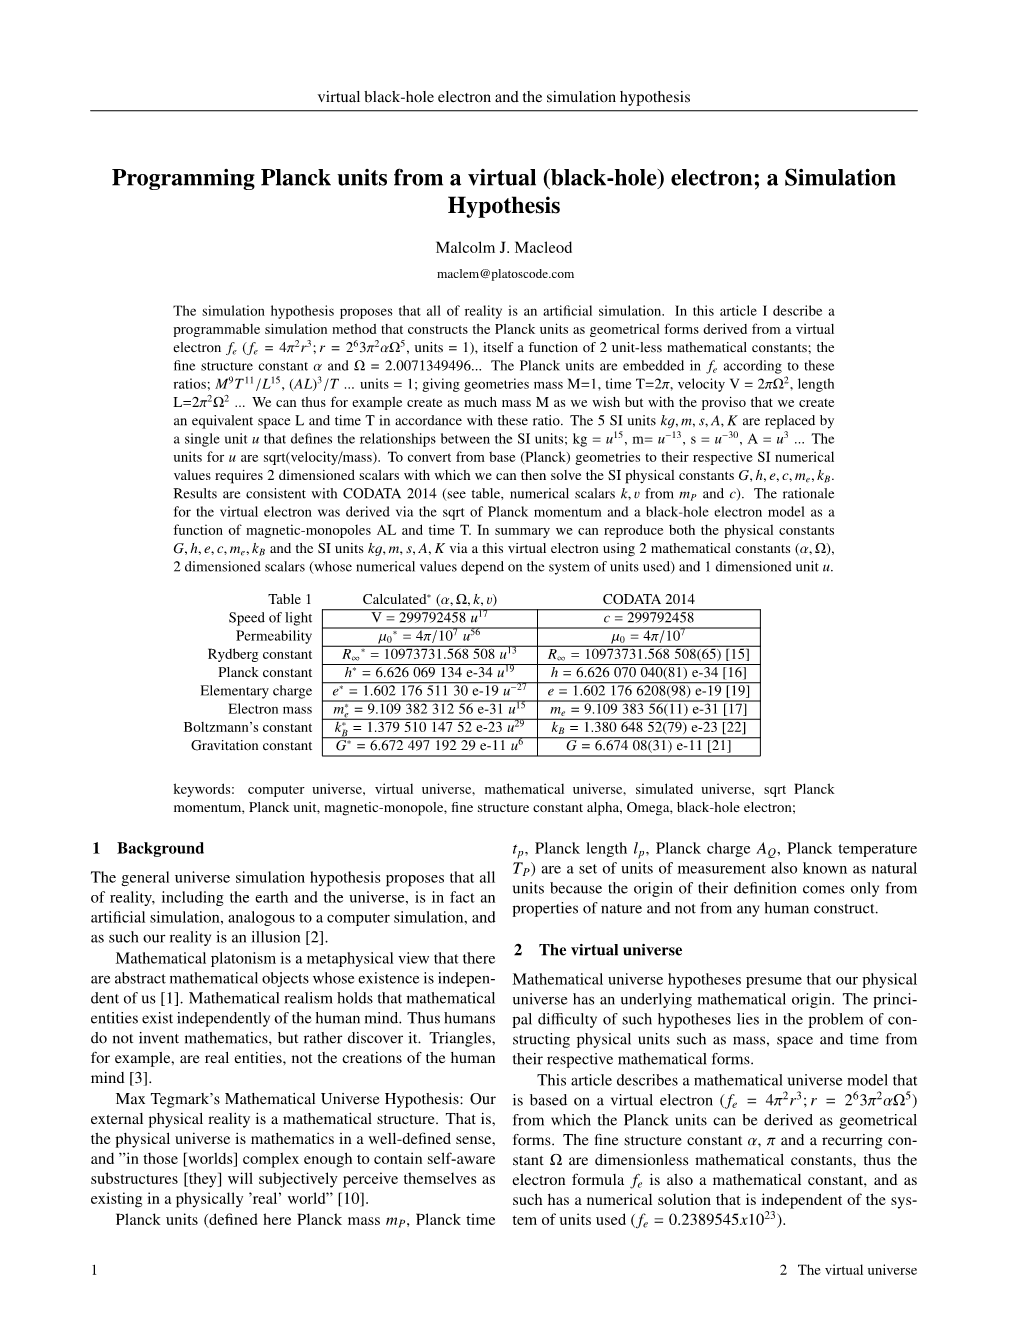 Programming Planck Units from a Virtual (Black-Hole) Electron; a Simulation Hypothesis